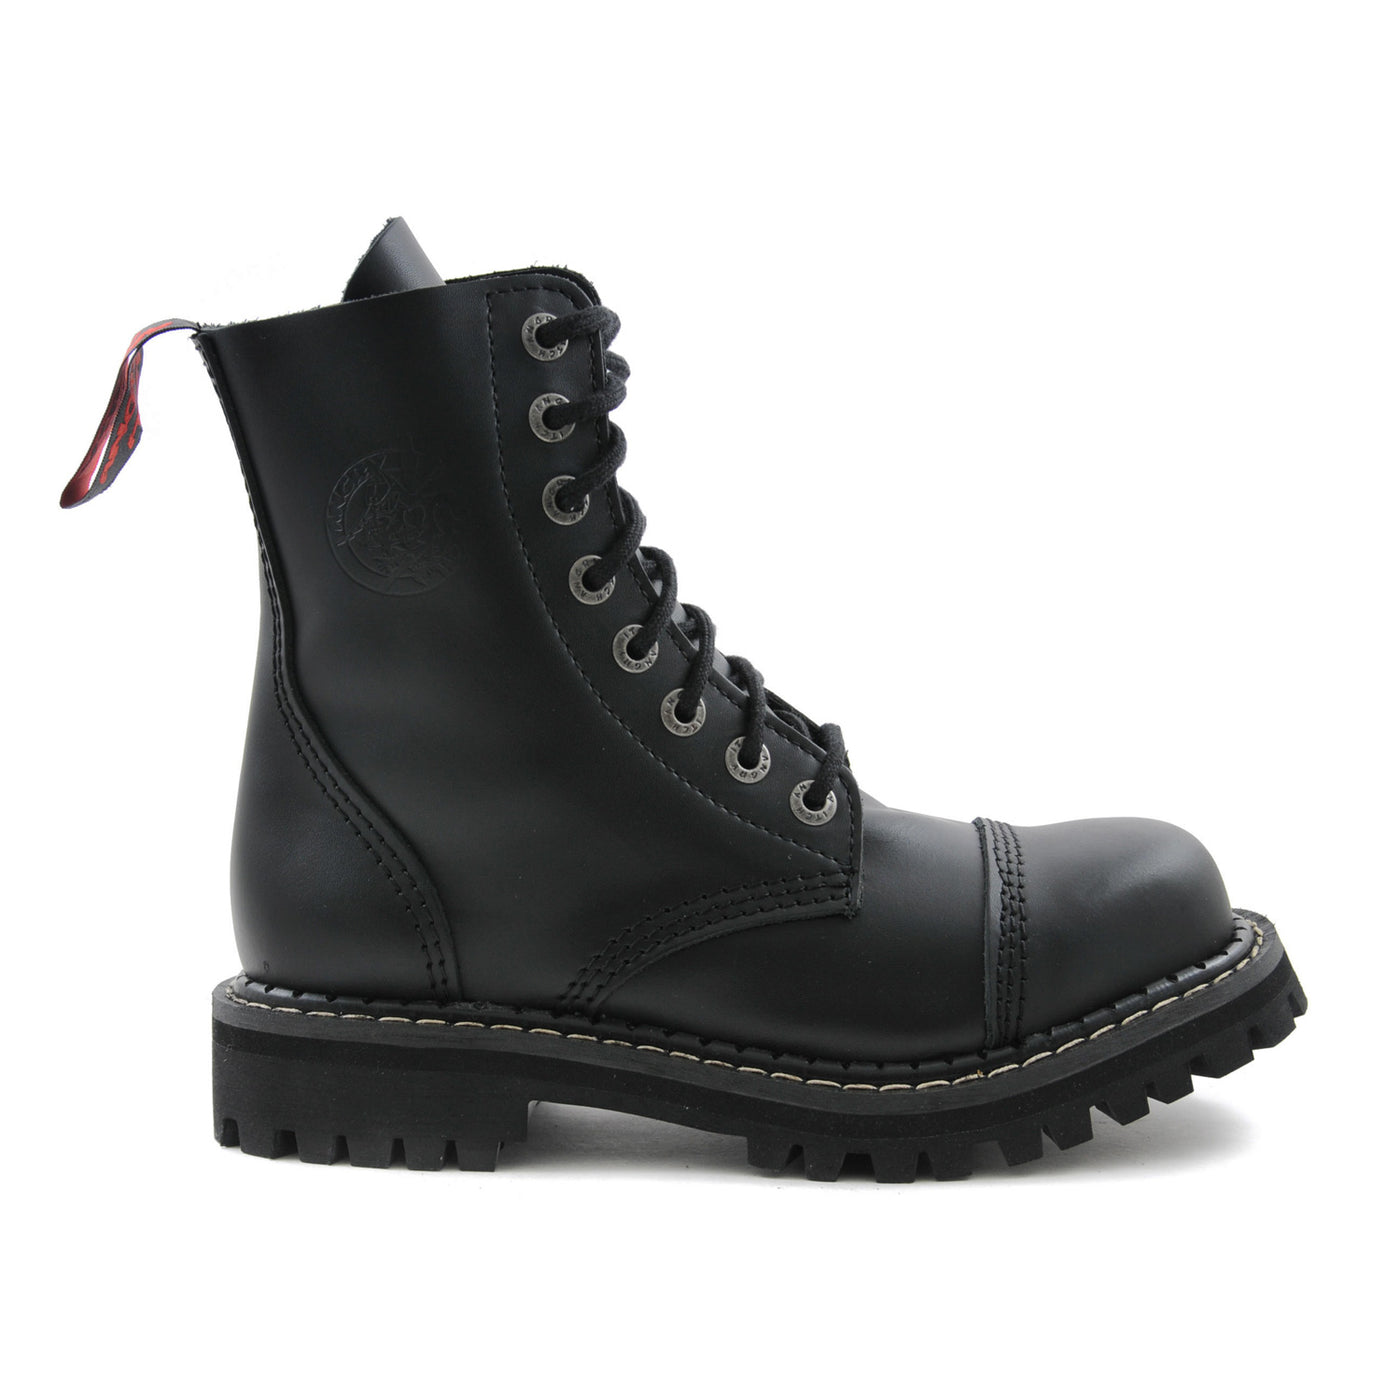 Angry Itch 8 Eyelet Boots with Steel Toe Cap Black Leather